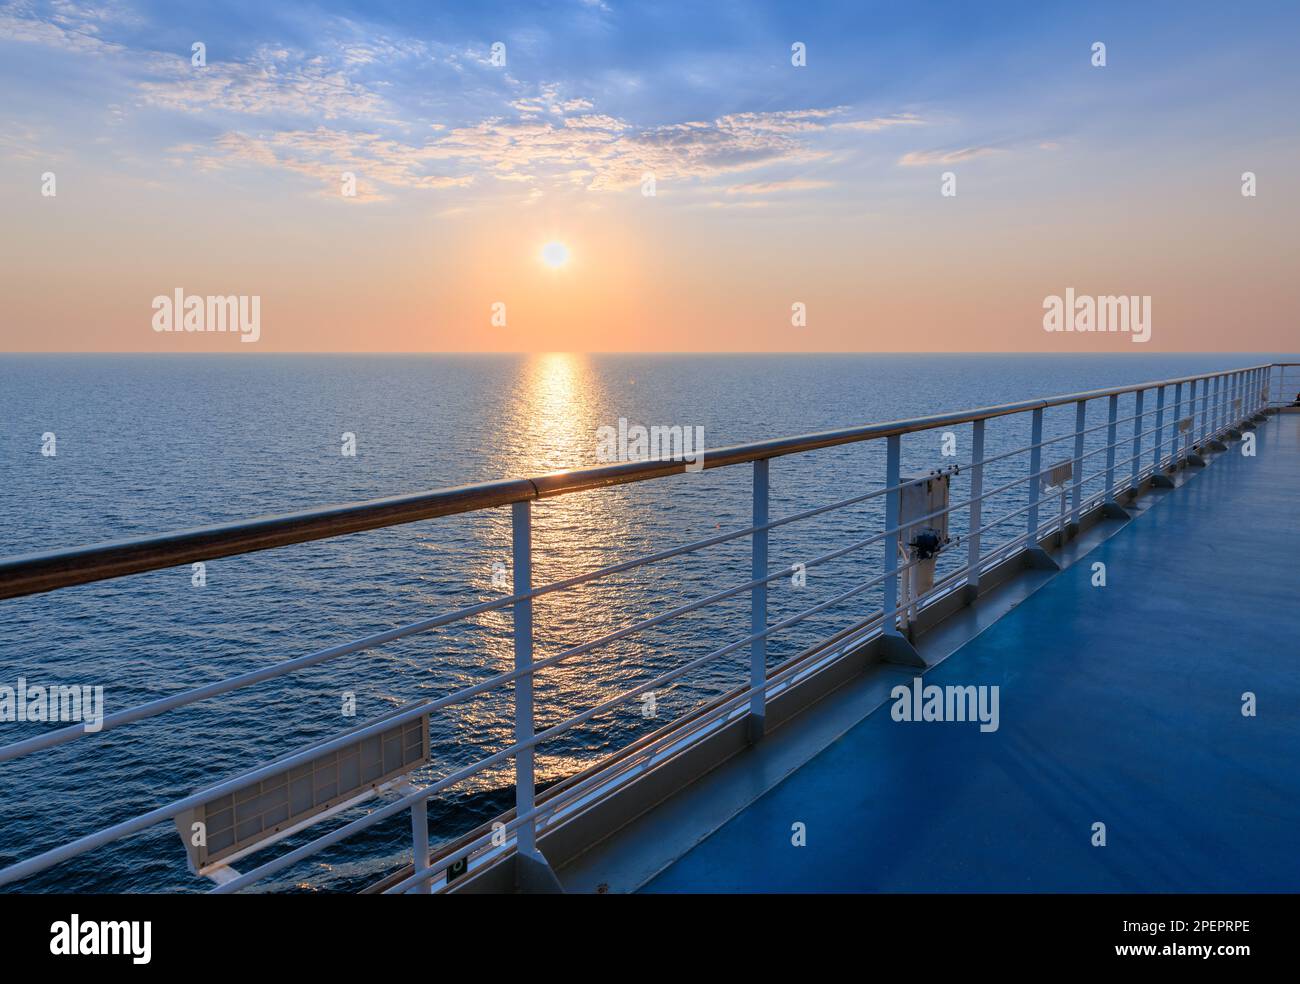 Sea horizon at sunset from deck of cruise ship. Stock Photo